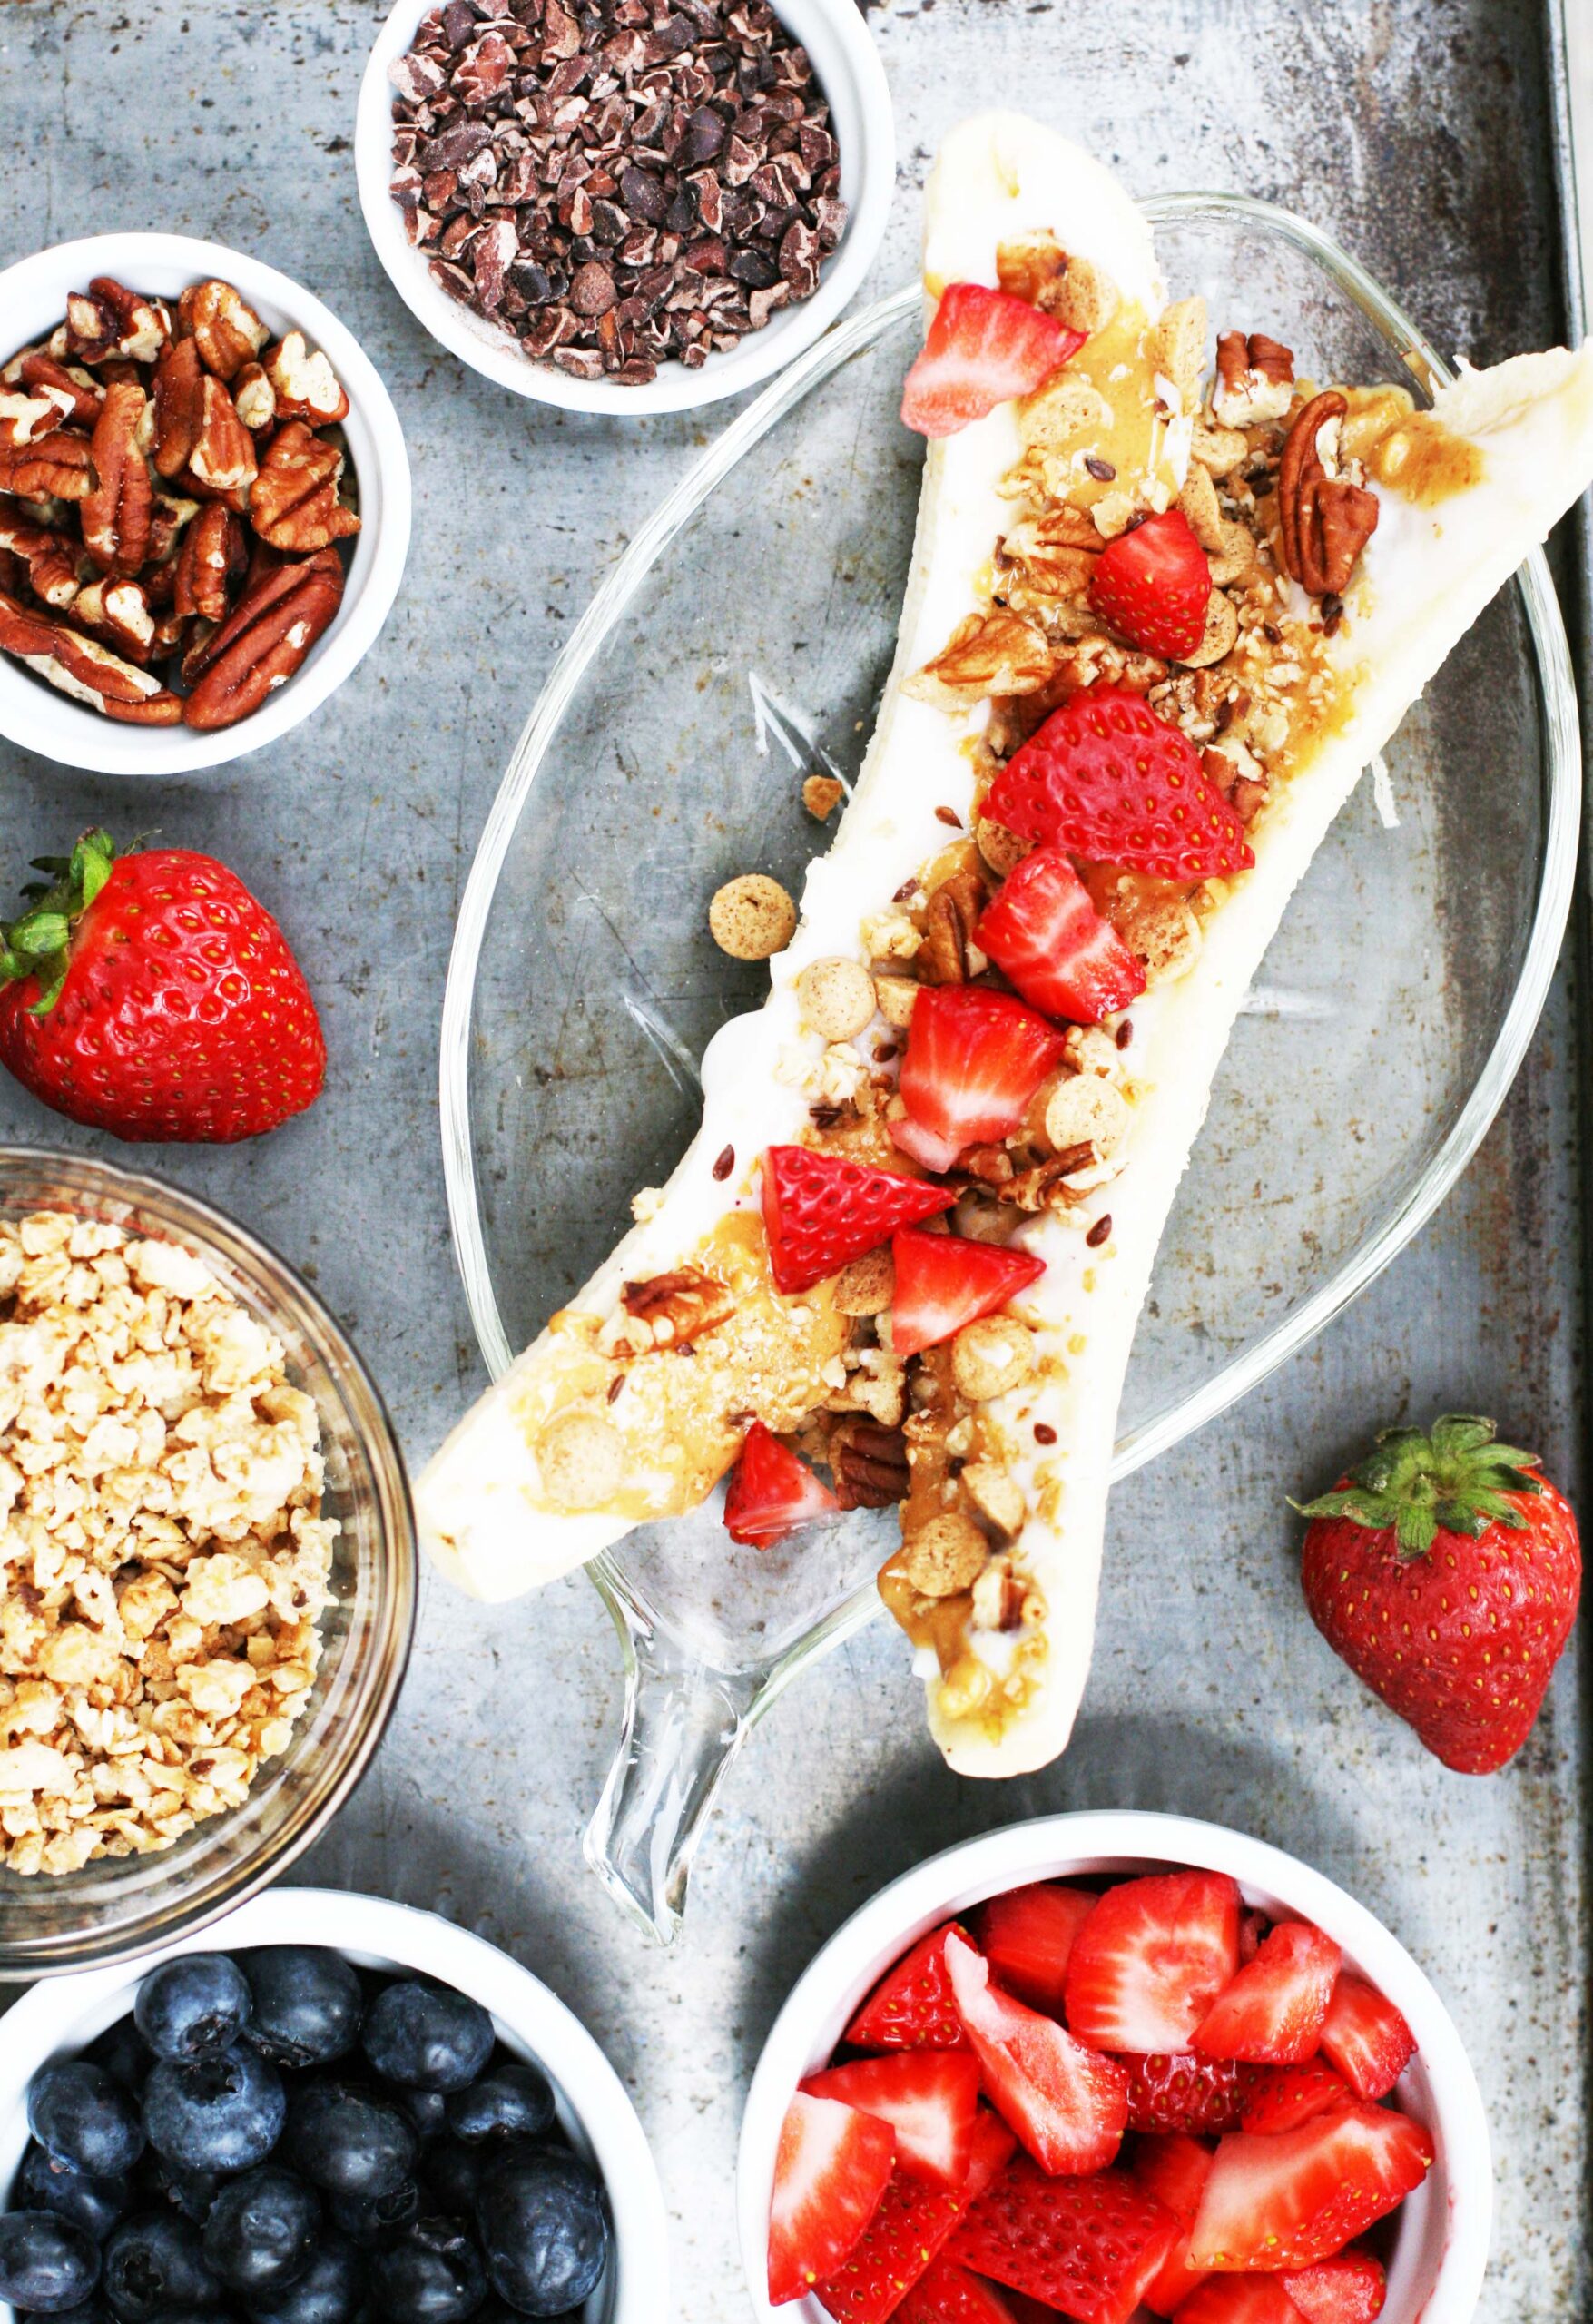 Breakfast banana splits: This affordable, fun breakfast idea is also healthy and delicious.